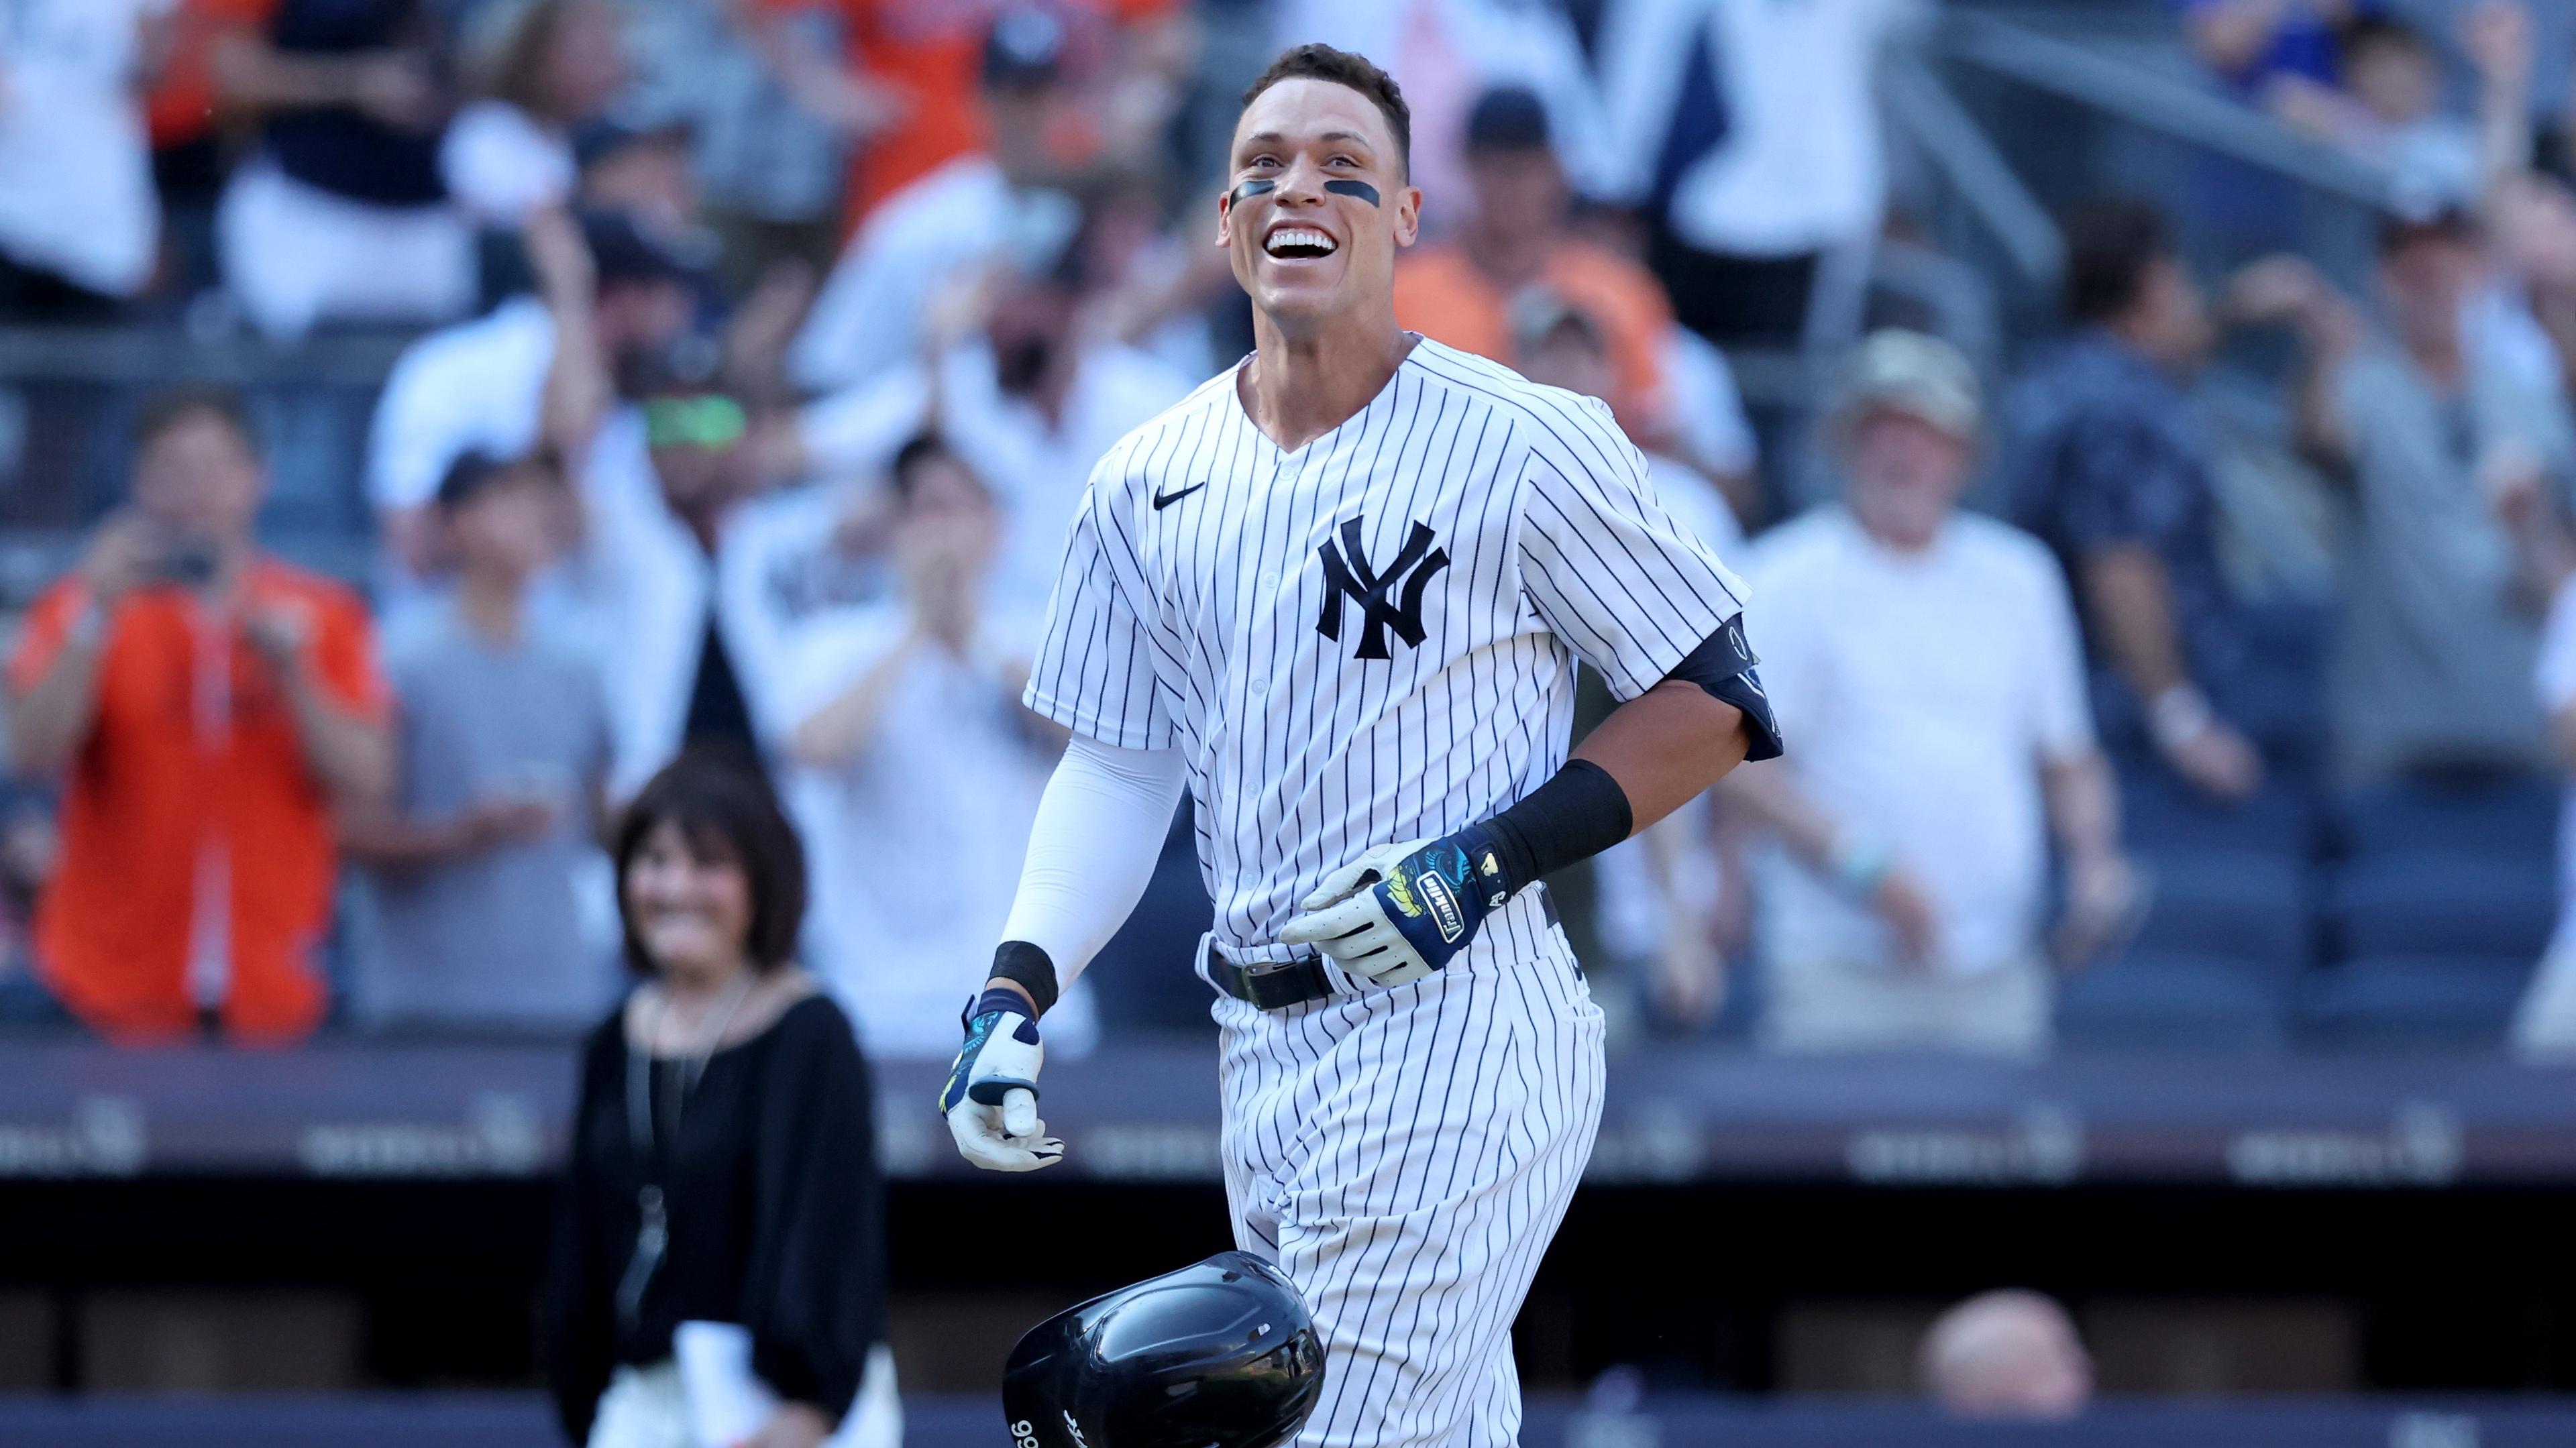 Jun 26, 2022; Bronx, New York, USA; New York Yankees center fielder Aaron Judge (99) tosses his helmet as he comes home after hitting a game winning walk off three run home run against the Houston Astros during the tenth inning at Yankee Stadium. / Brad Penner-USA TODAY Sports